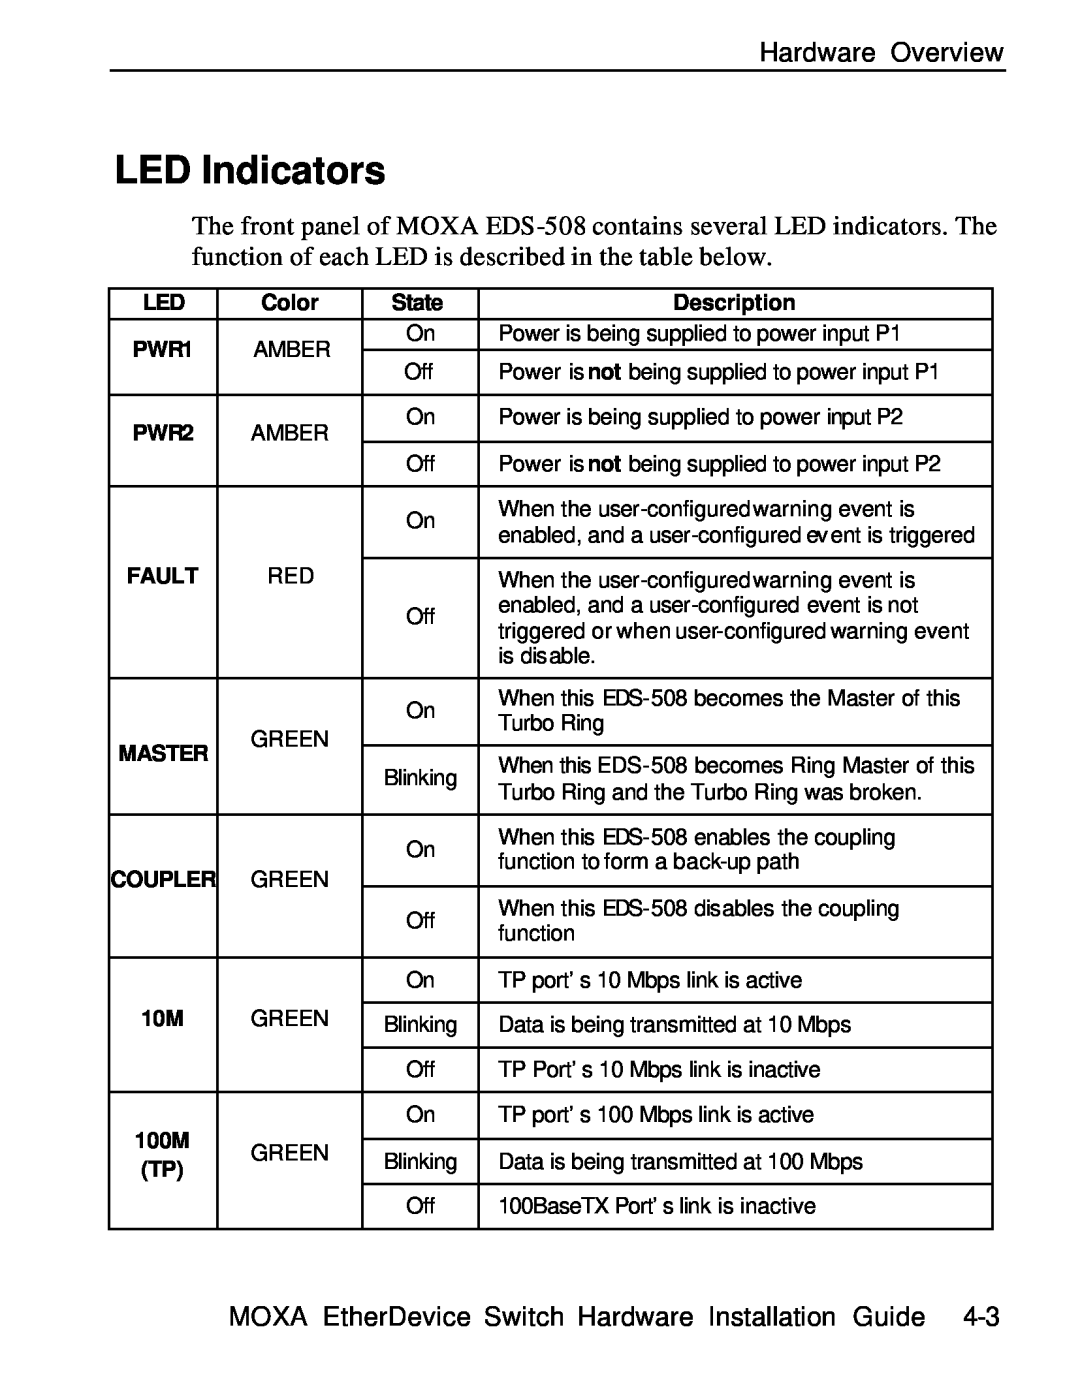 Moxa Technologies EDS-508 LED Indicators, Hardware Overview, MOXA EtherDevice Switch Hardware Installation Guide, Color 